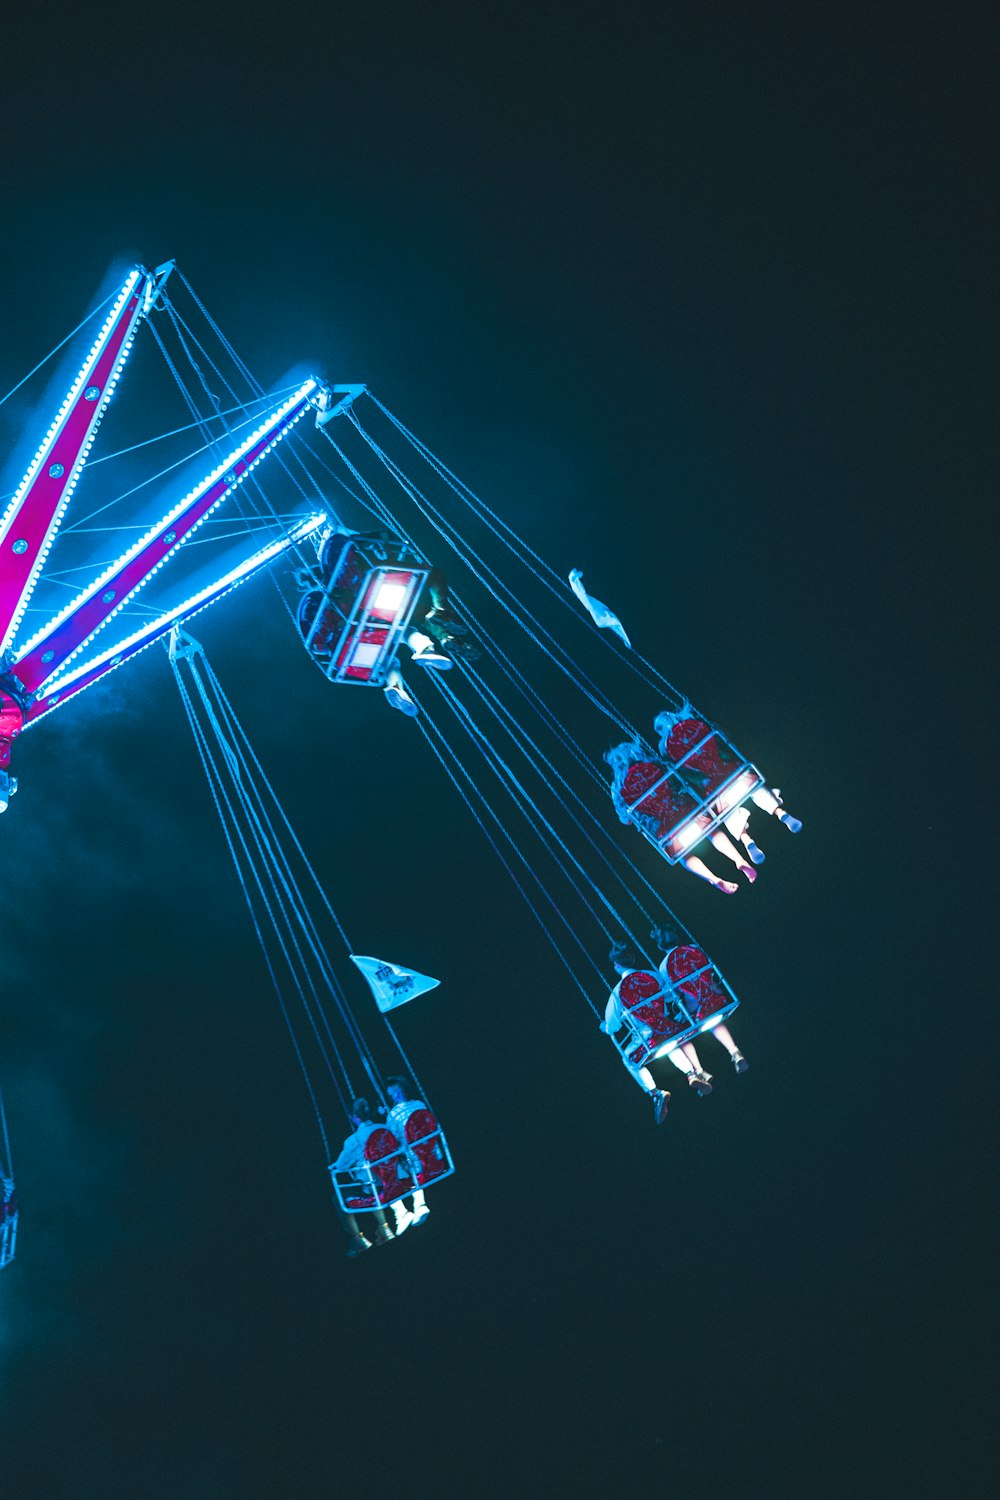 a carnival ride is lit up at night